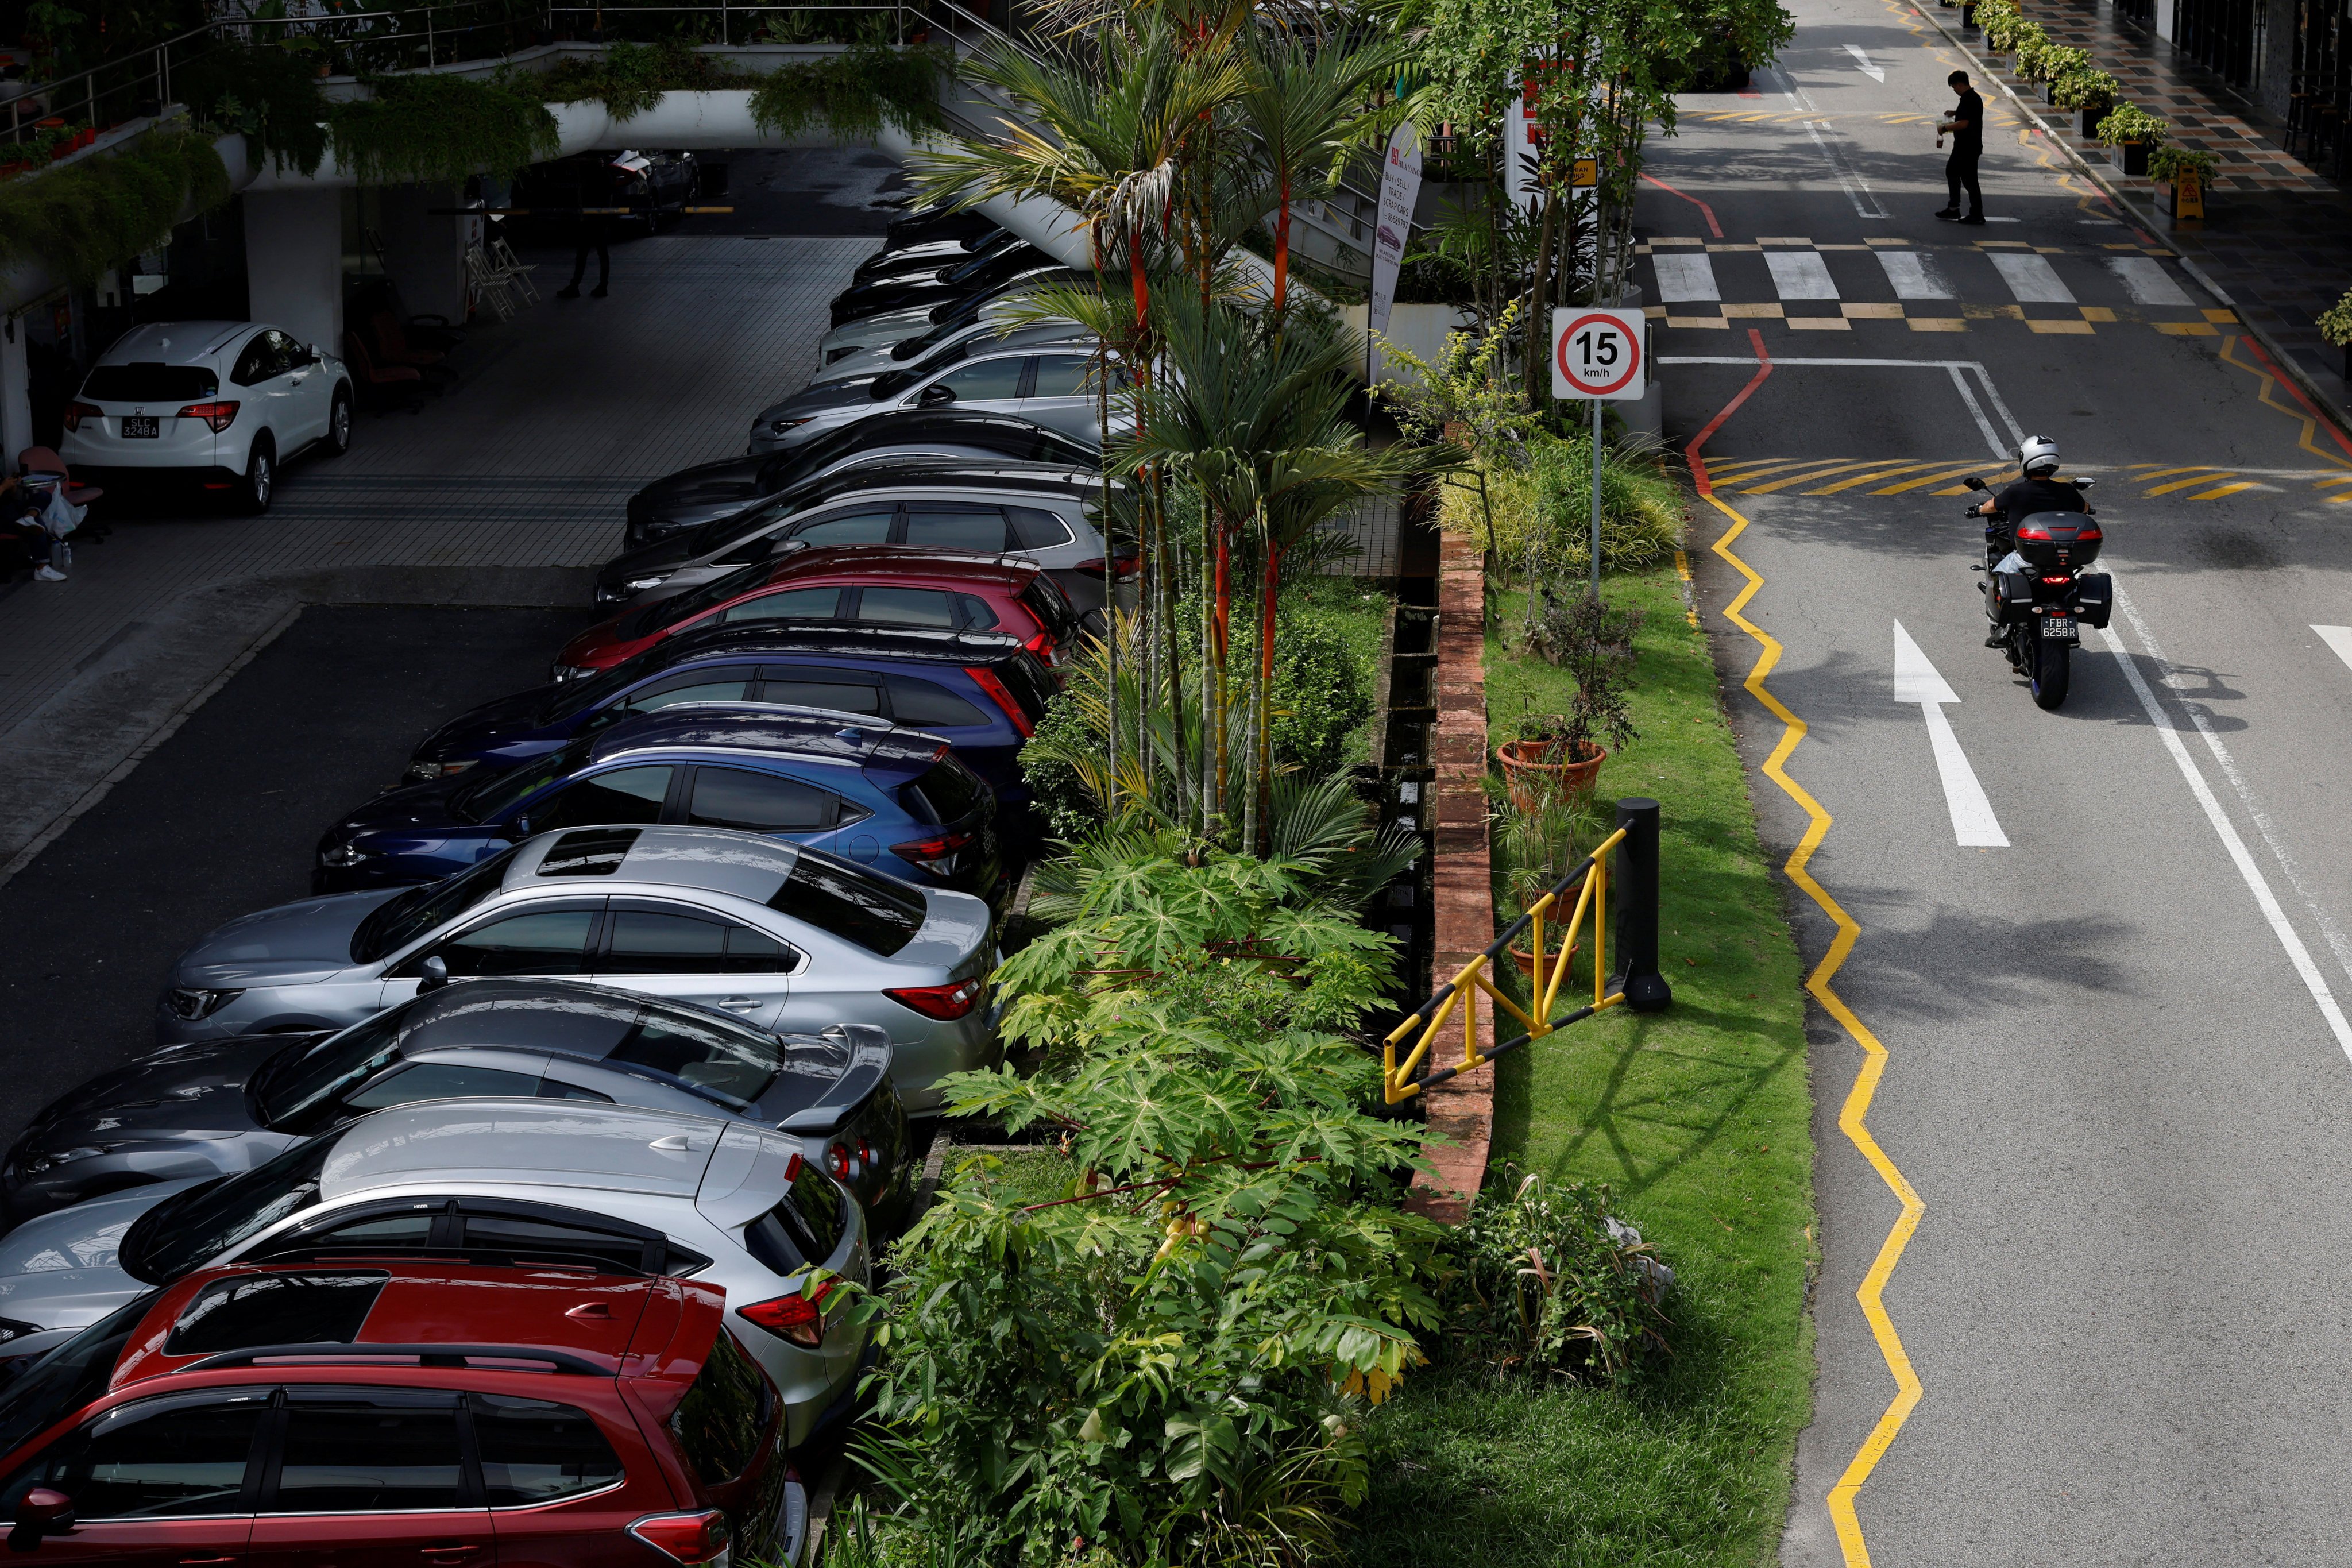 Cars for sale are parked at used car dealerships in Singapore. Higher COE prices continue a trend that has seen such values exceeding S$100,000 in the last 12 months. Photo: Reuters